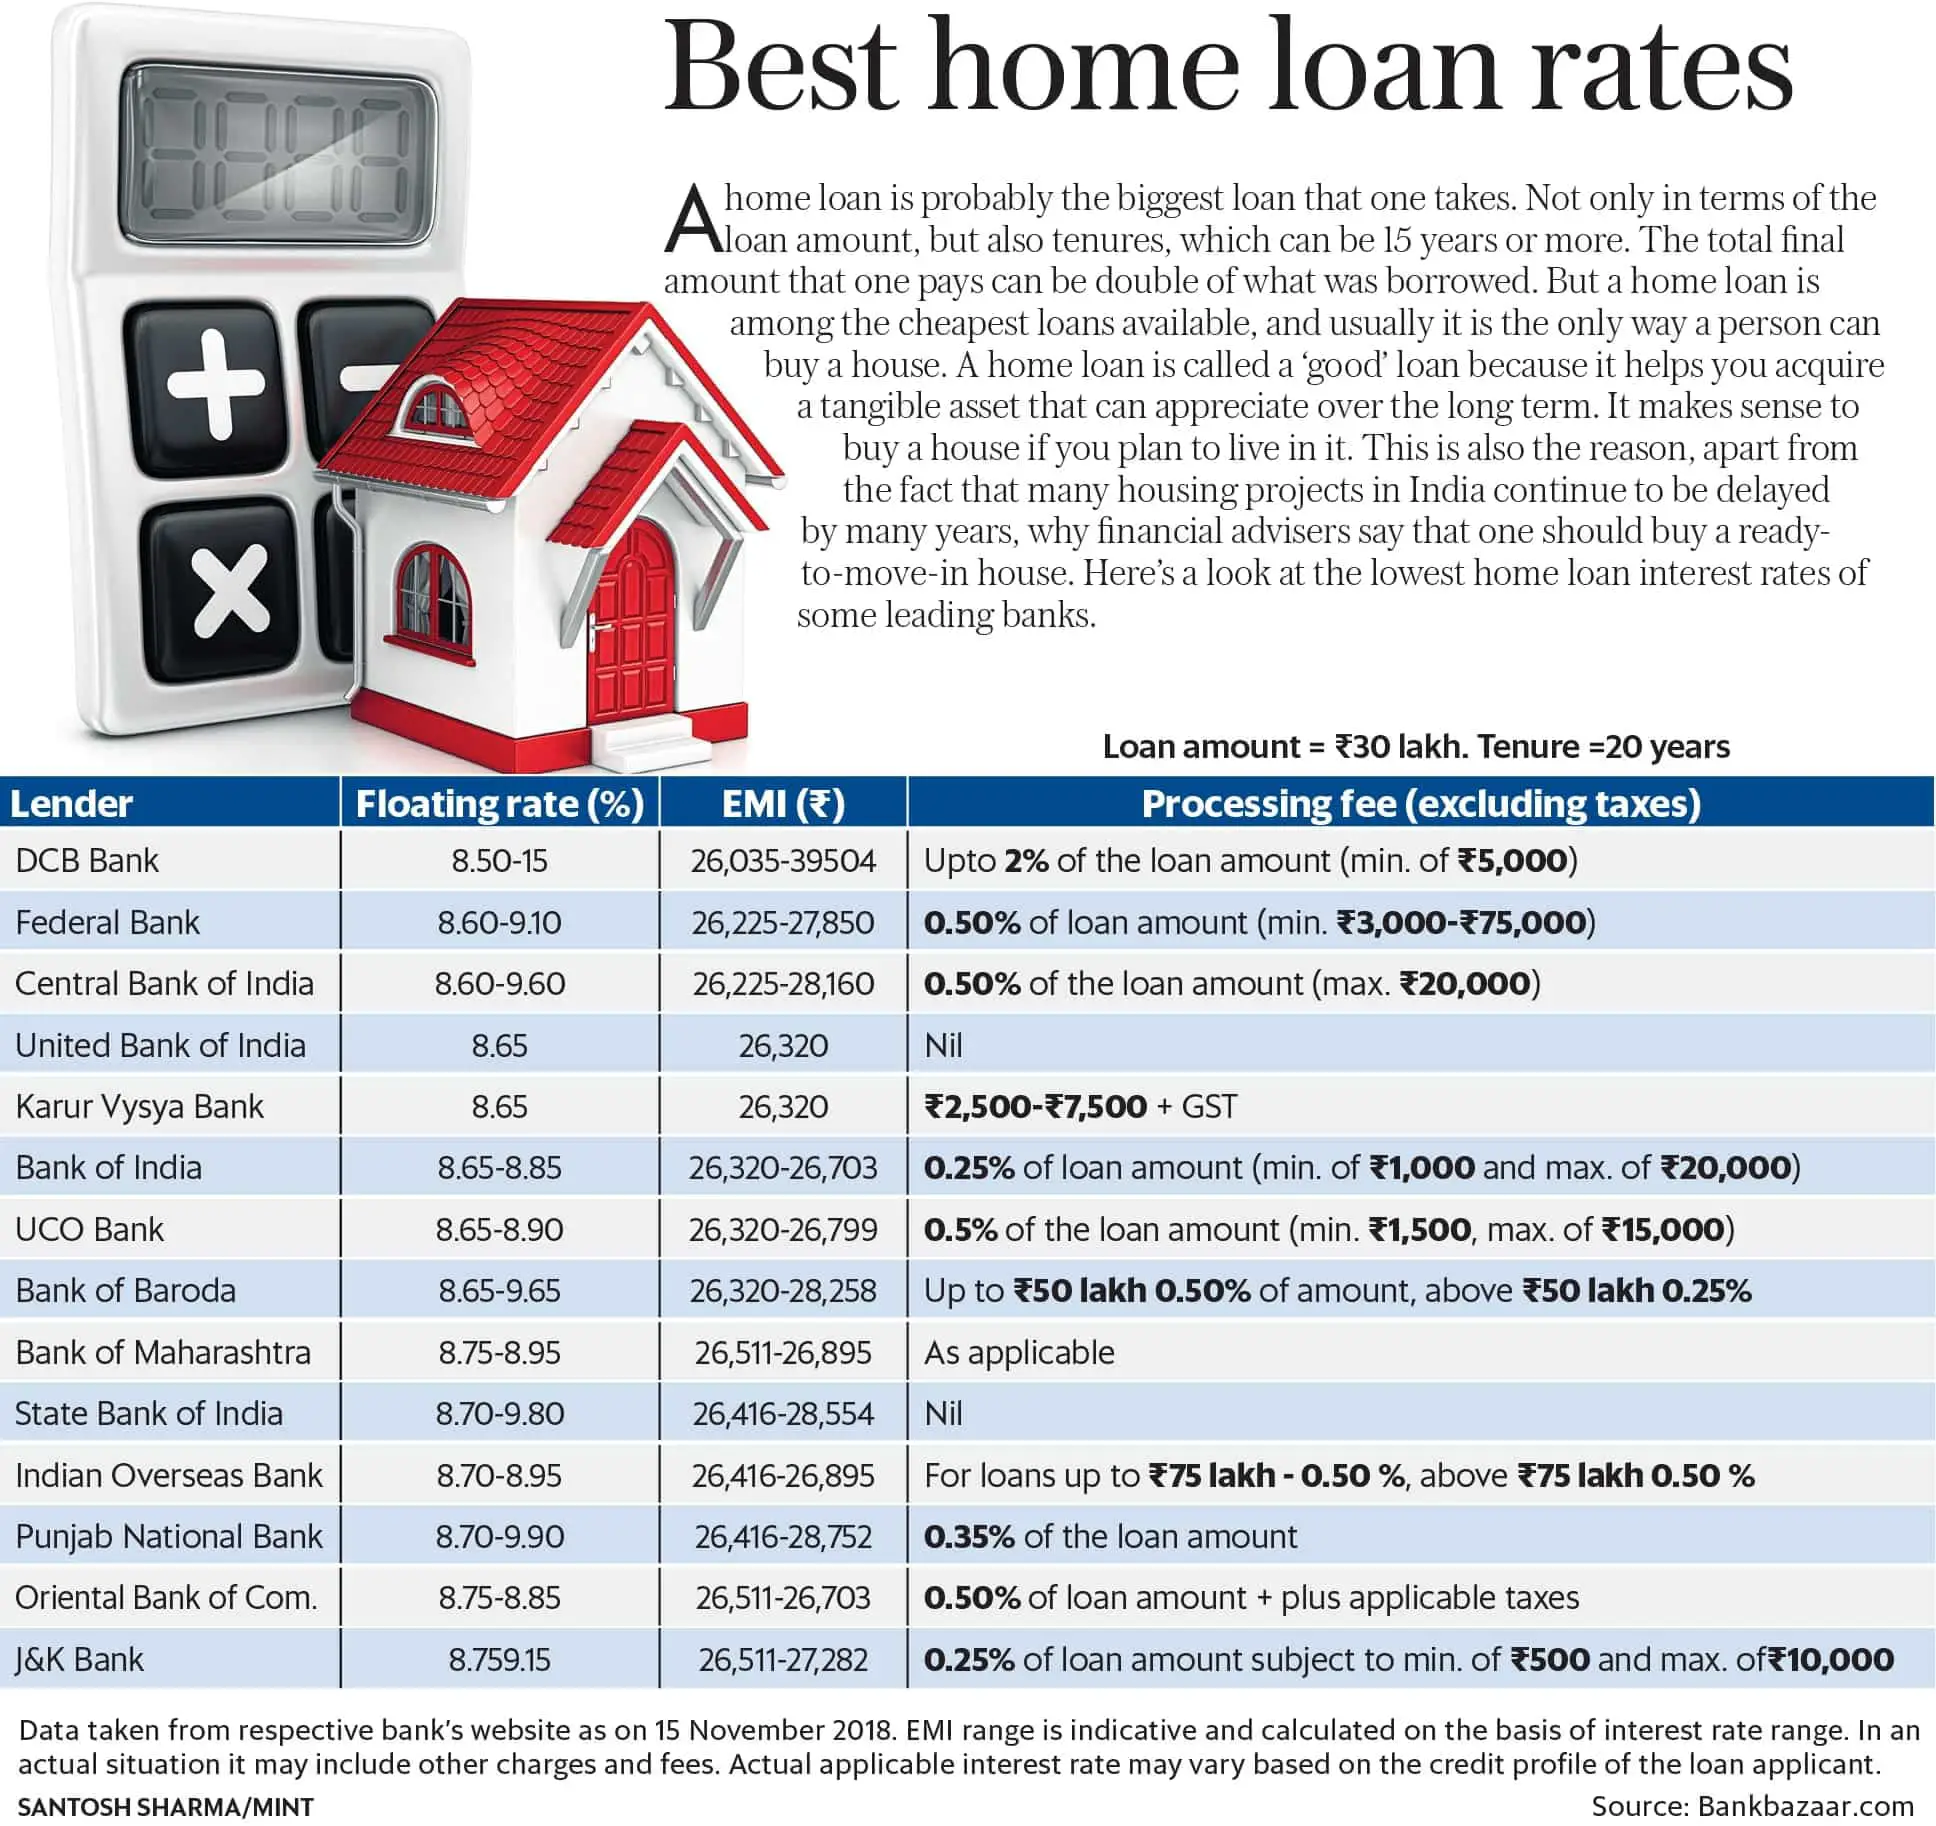 Best home loan interest rates from SBI, PNB, other banks